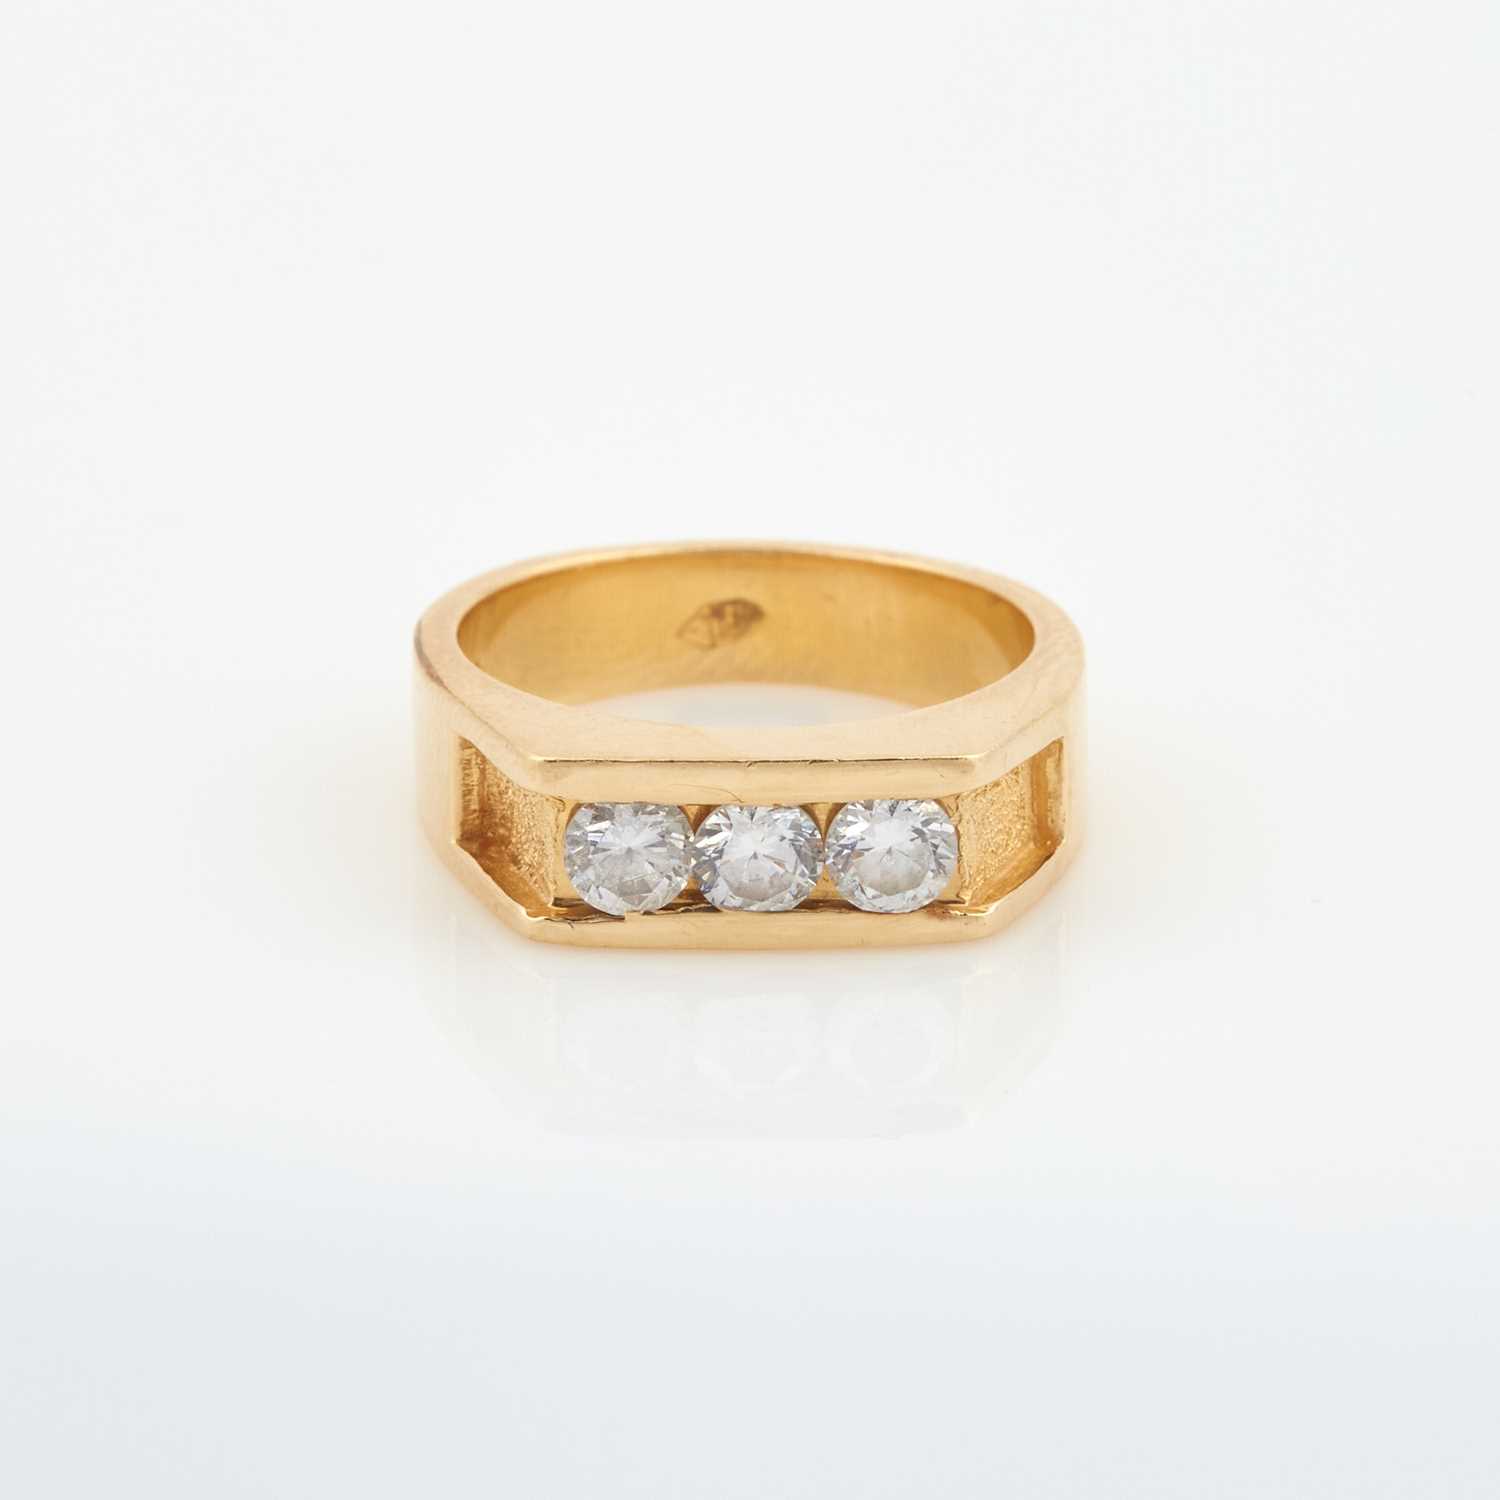 Lot 93 - Gold and Stone Ring, 14K 6 dwt. all